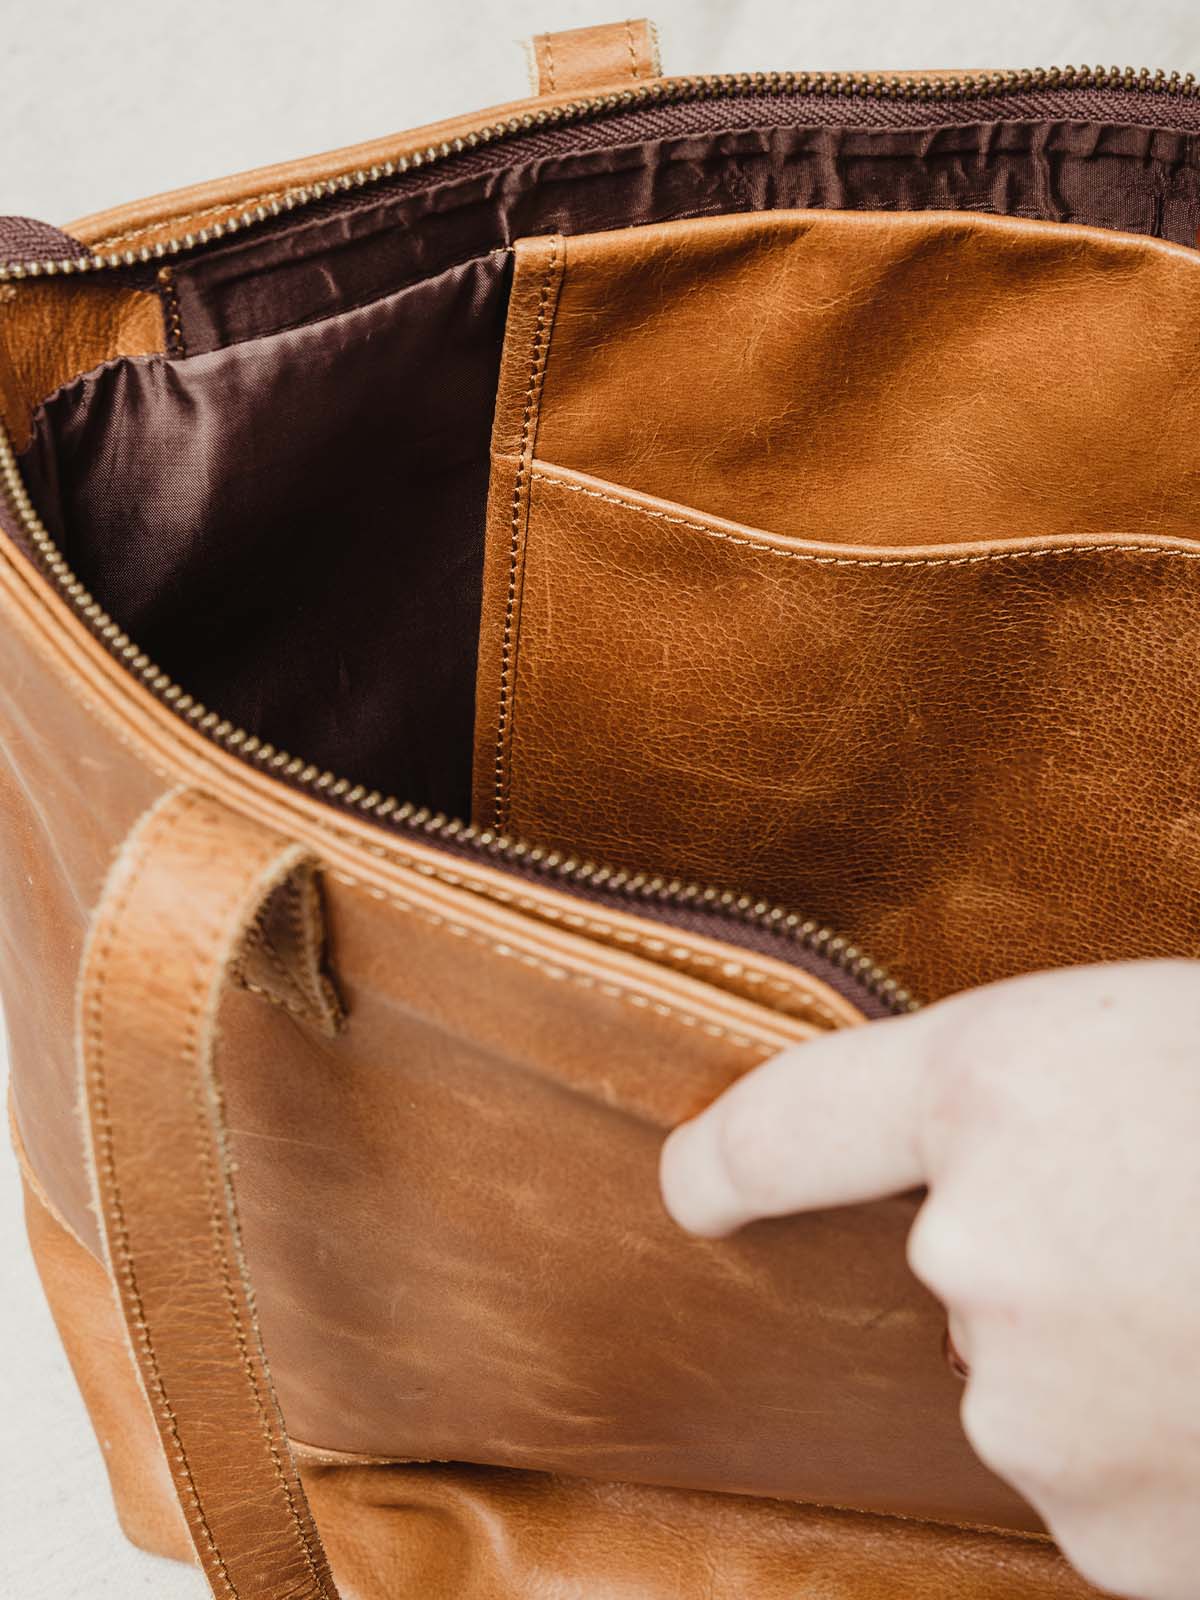 Interior close up on purses internal material. Handcrafted leather pouch for additional storage and quality dark brown lining. 